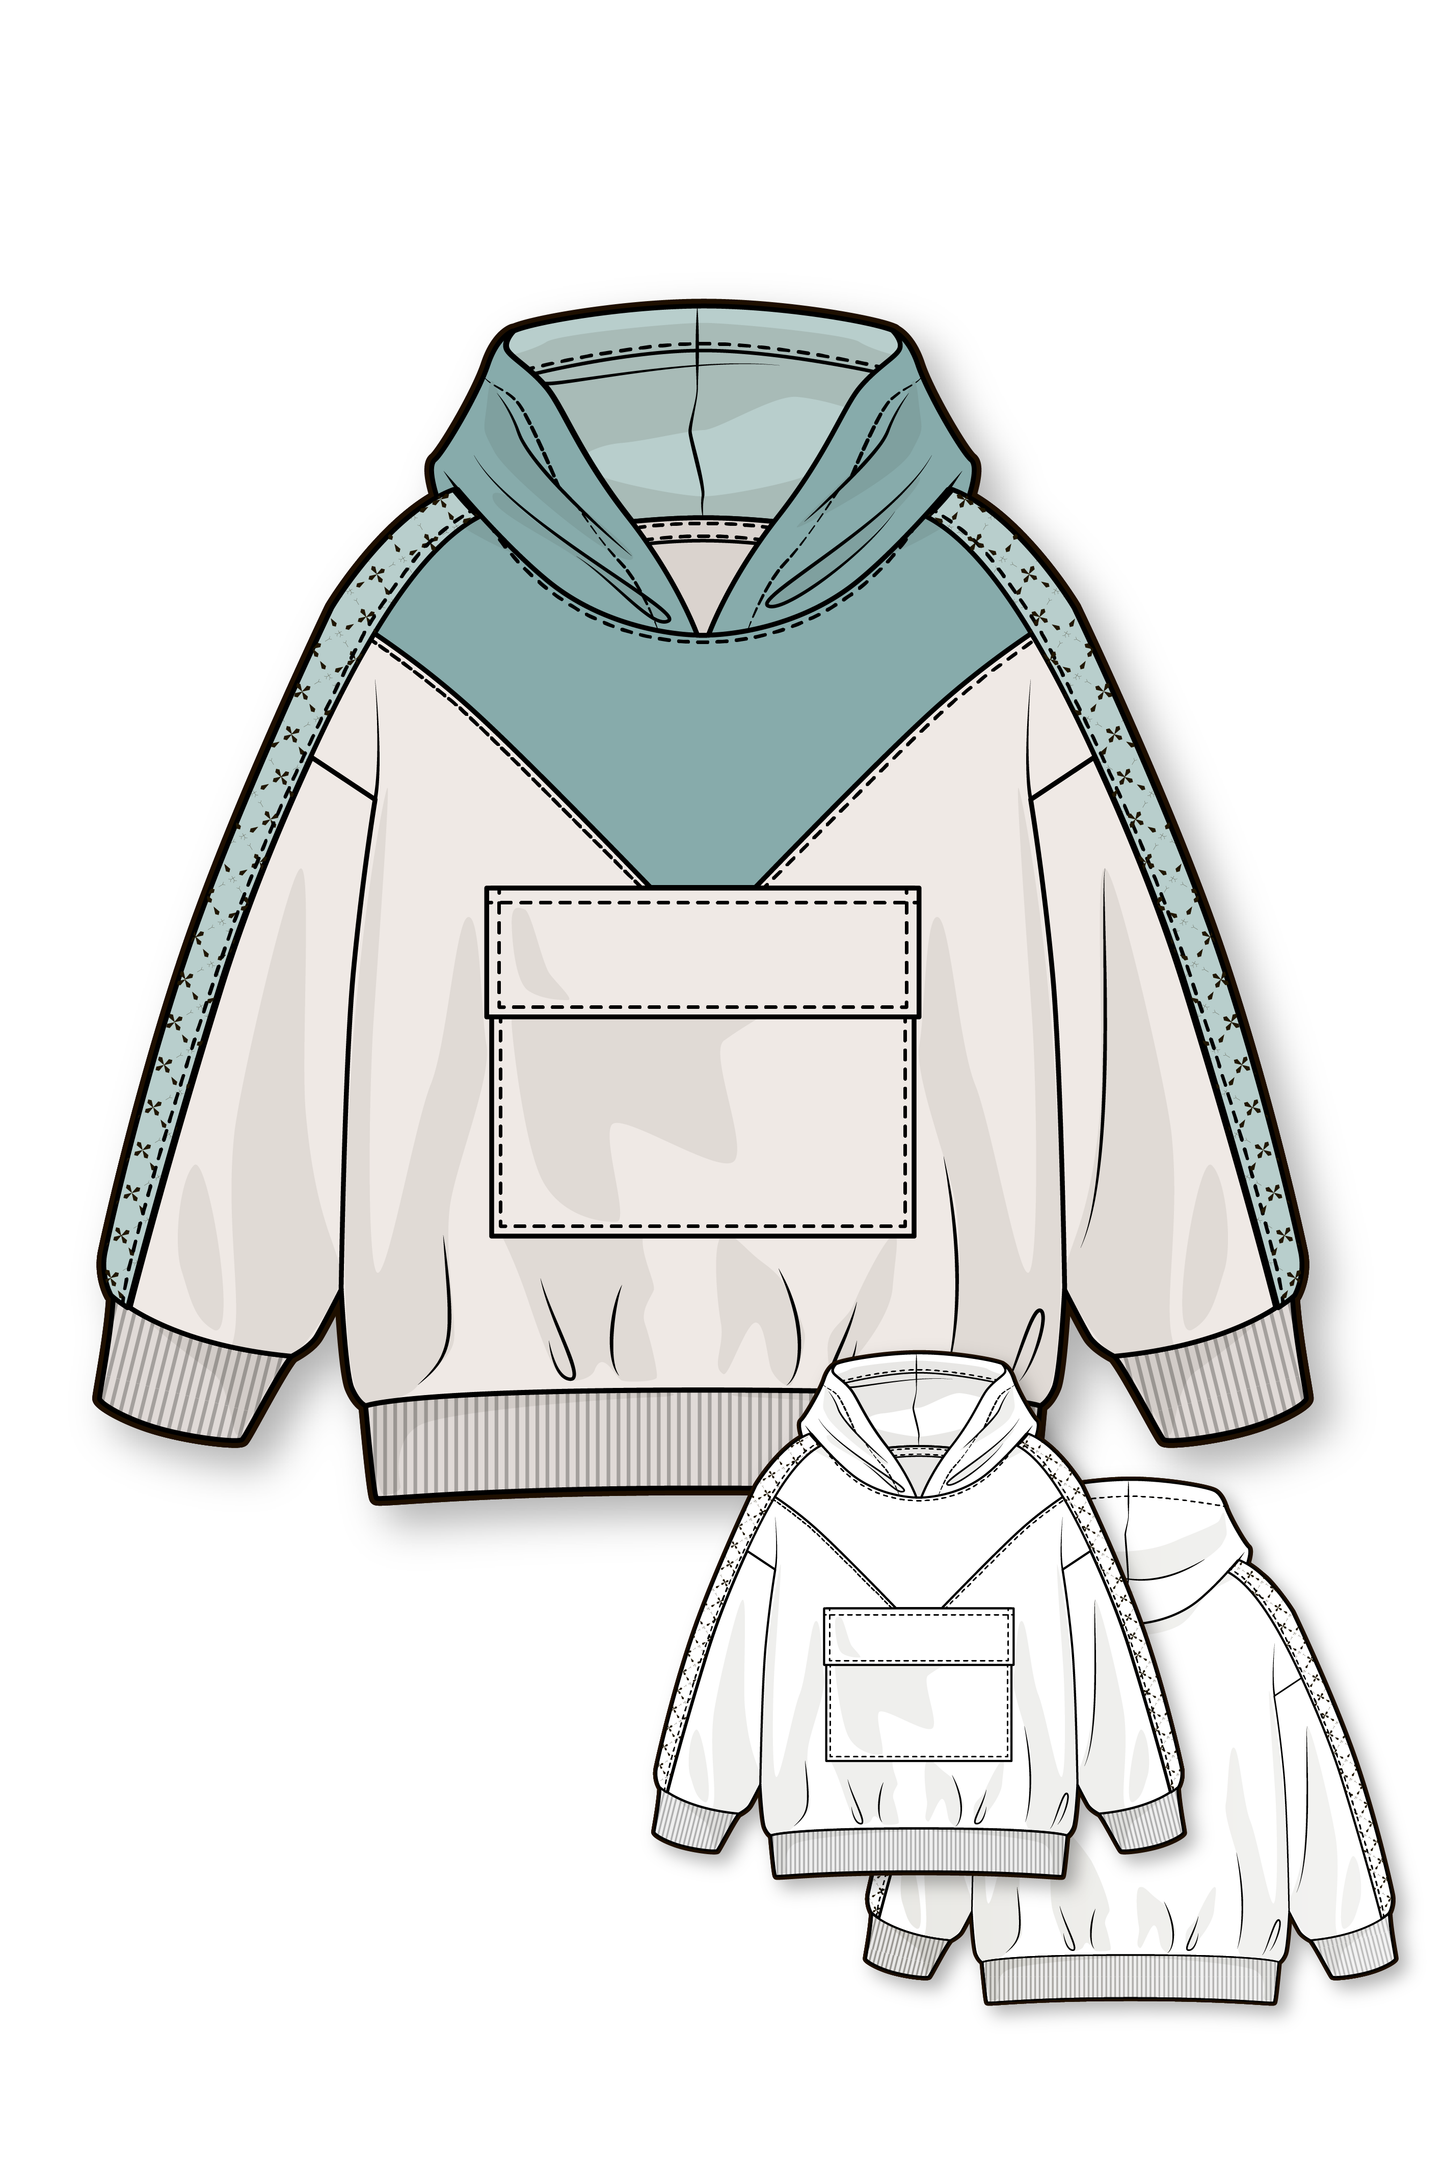 Oversize hoodie for boys and girls with triangle front yoke and flap pocket - PDF sewing pattern for kids - age 1-10 years